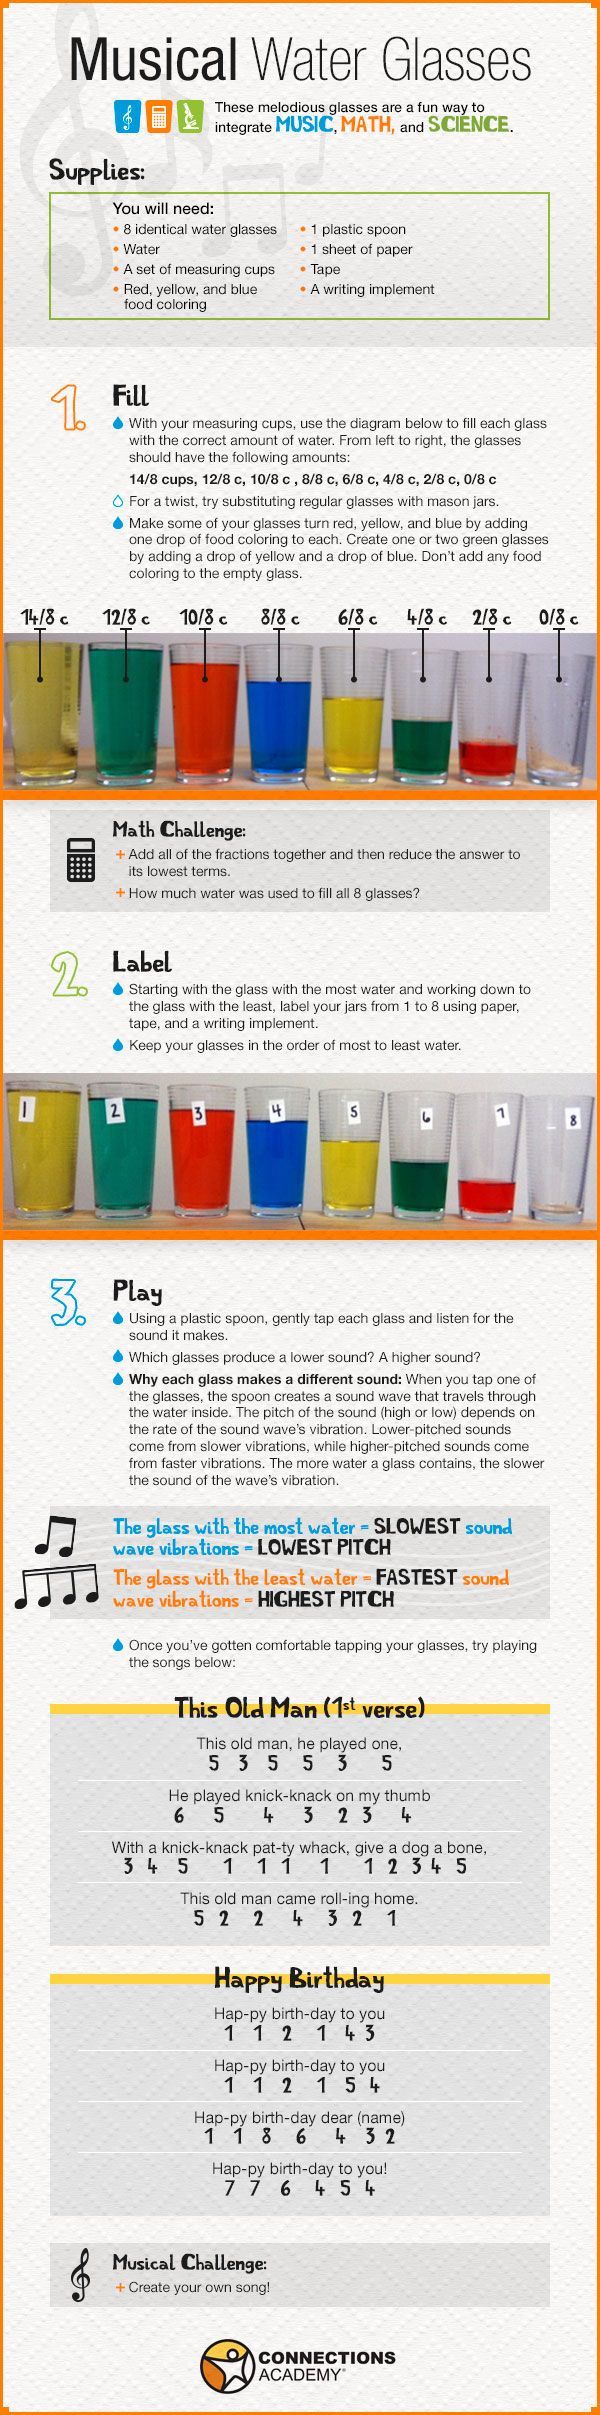 Experiment with Musical Water Glasses, and integrate music, math and science!